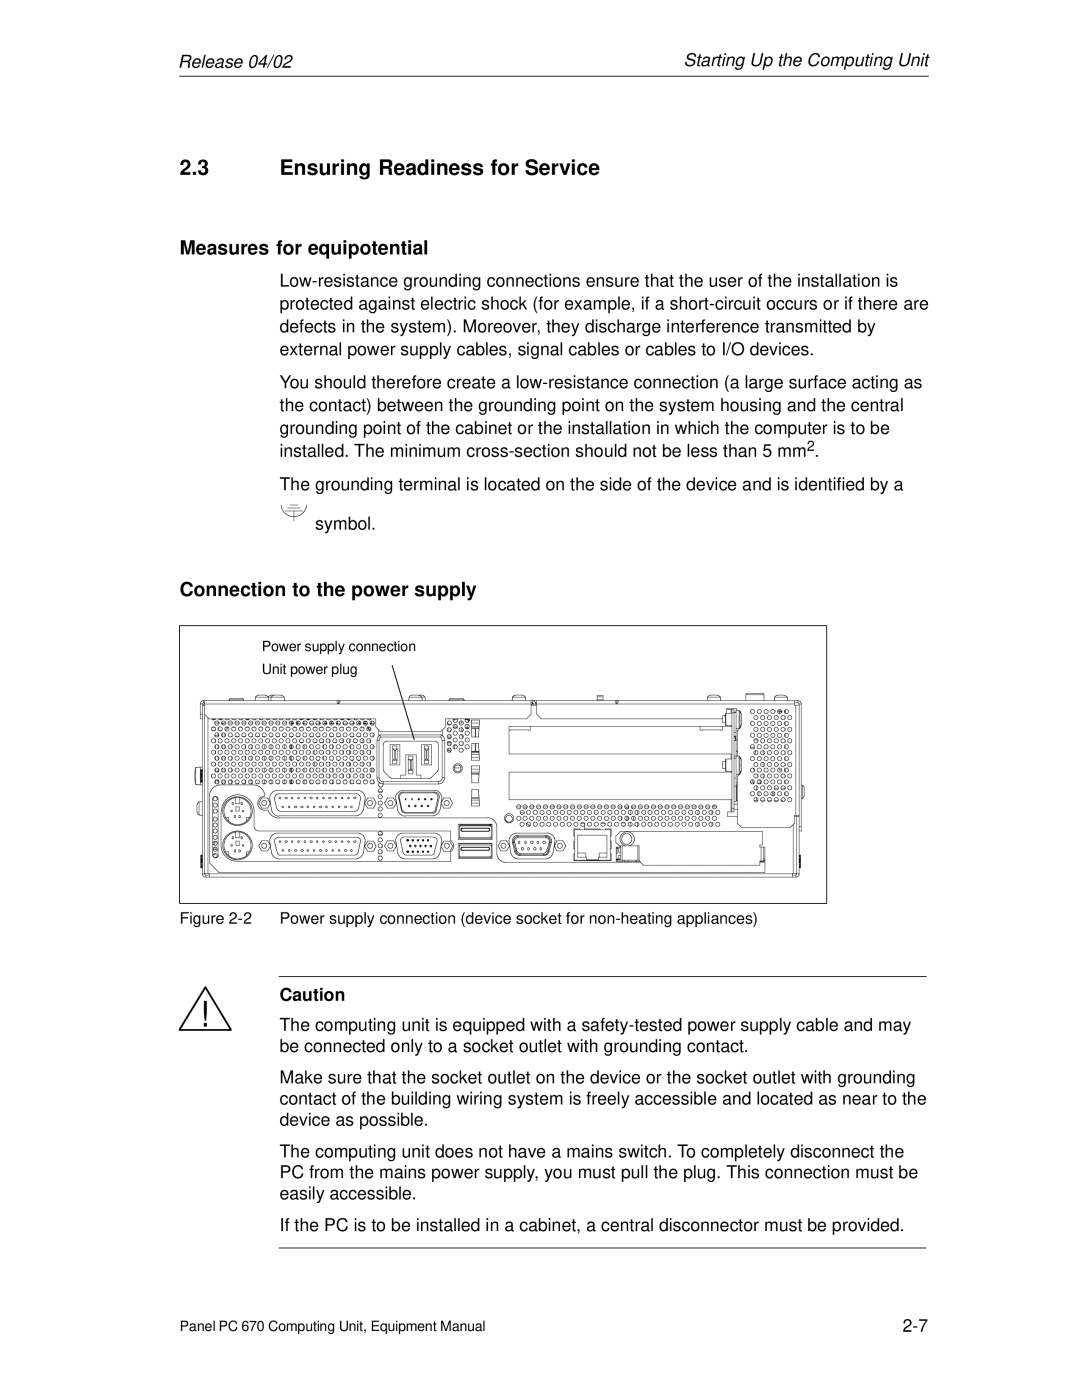 Siemens PC 670 manual Ensuring Readiness for Service, Measures for equipotential, Connection to the power supply 